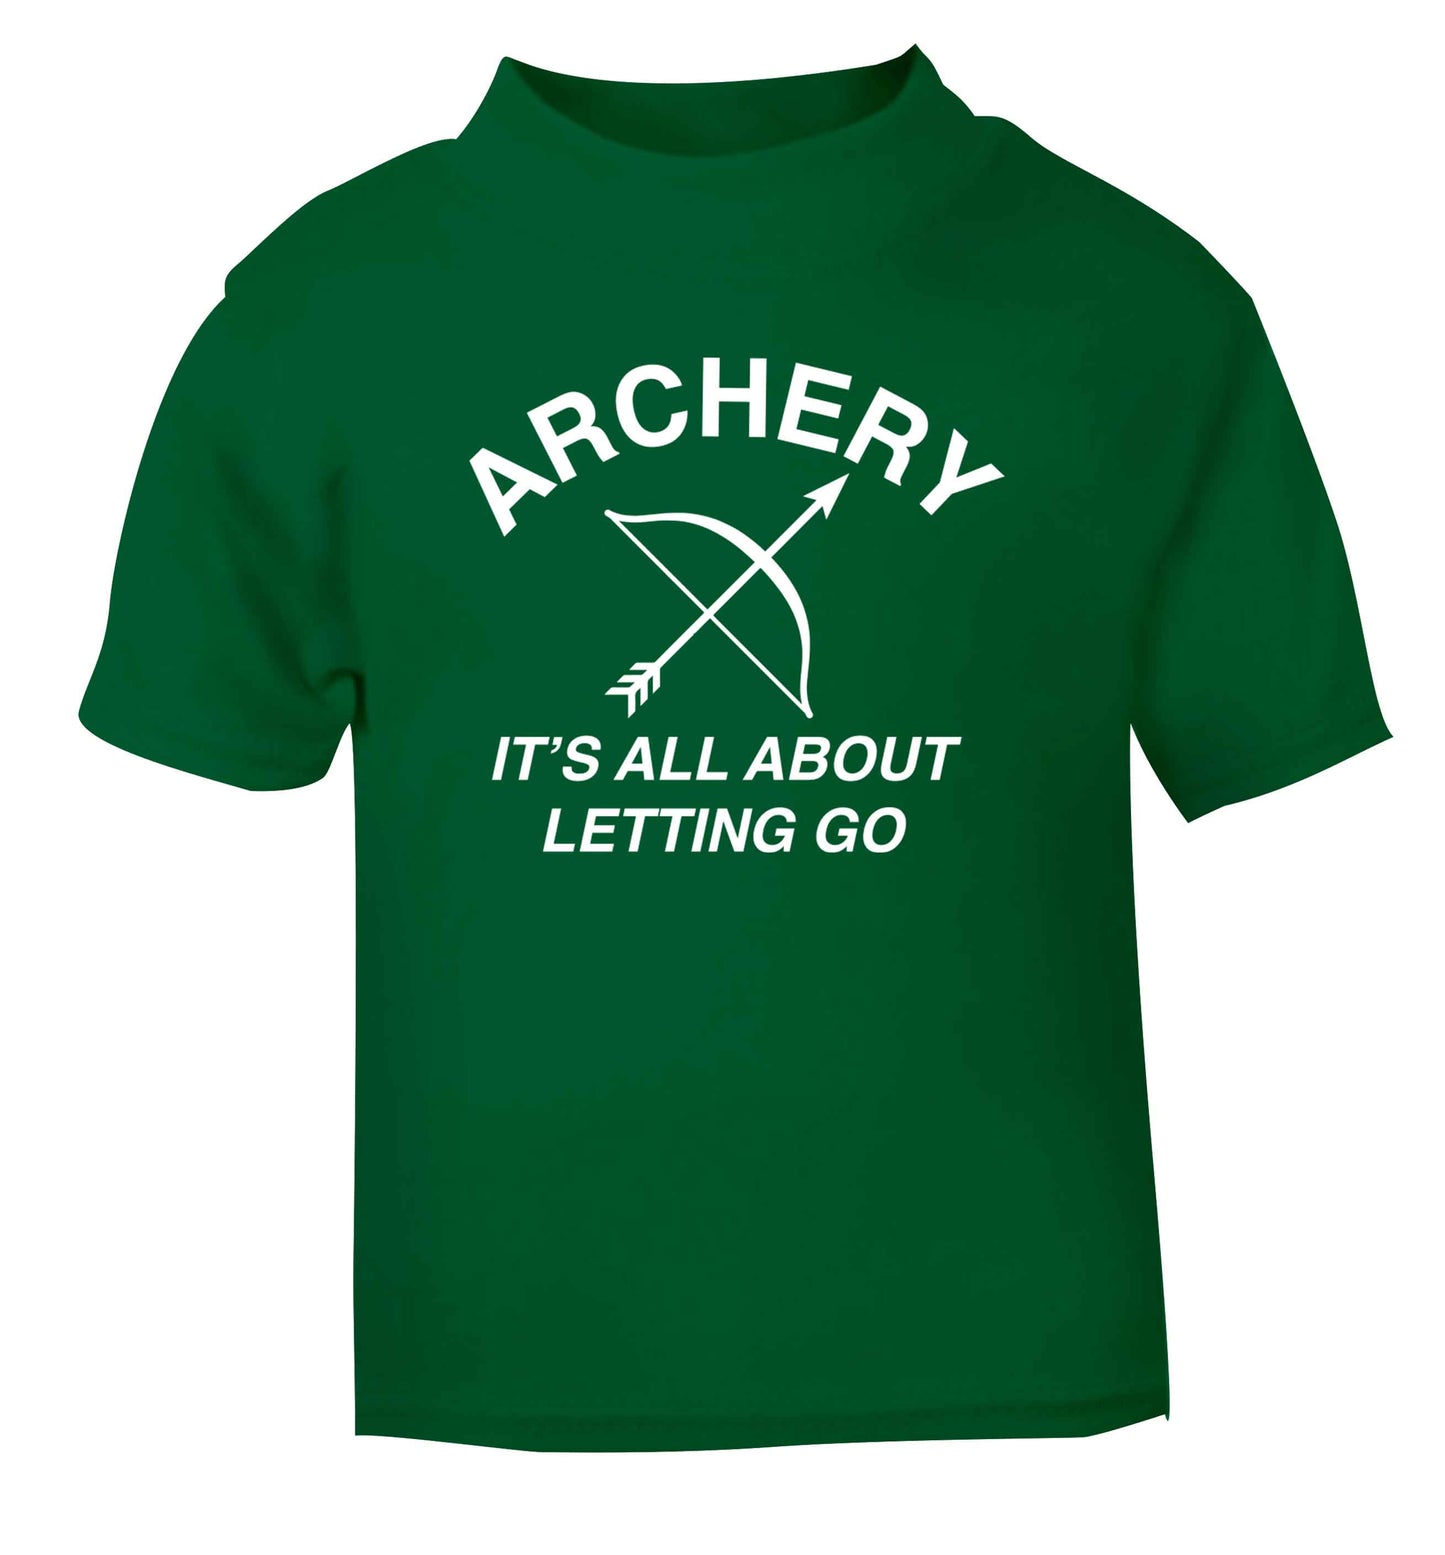 Archery it's all about letting go green Baby Toddler Tshirt 2 Years